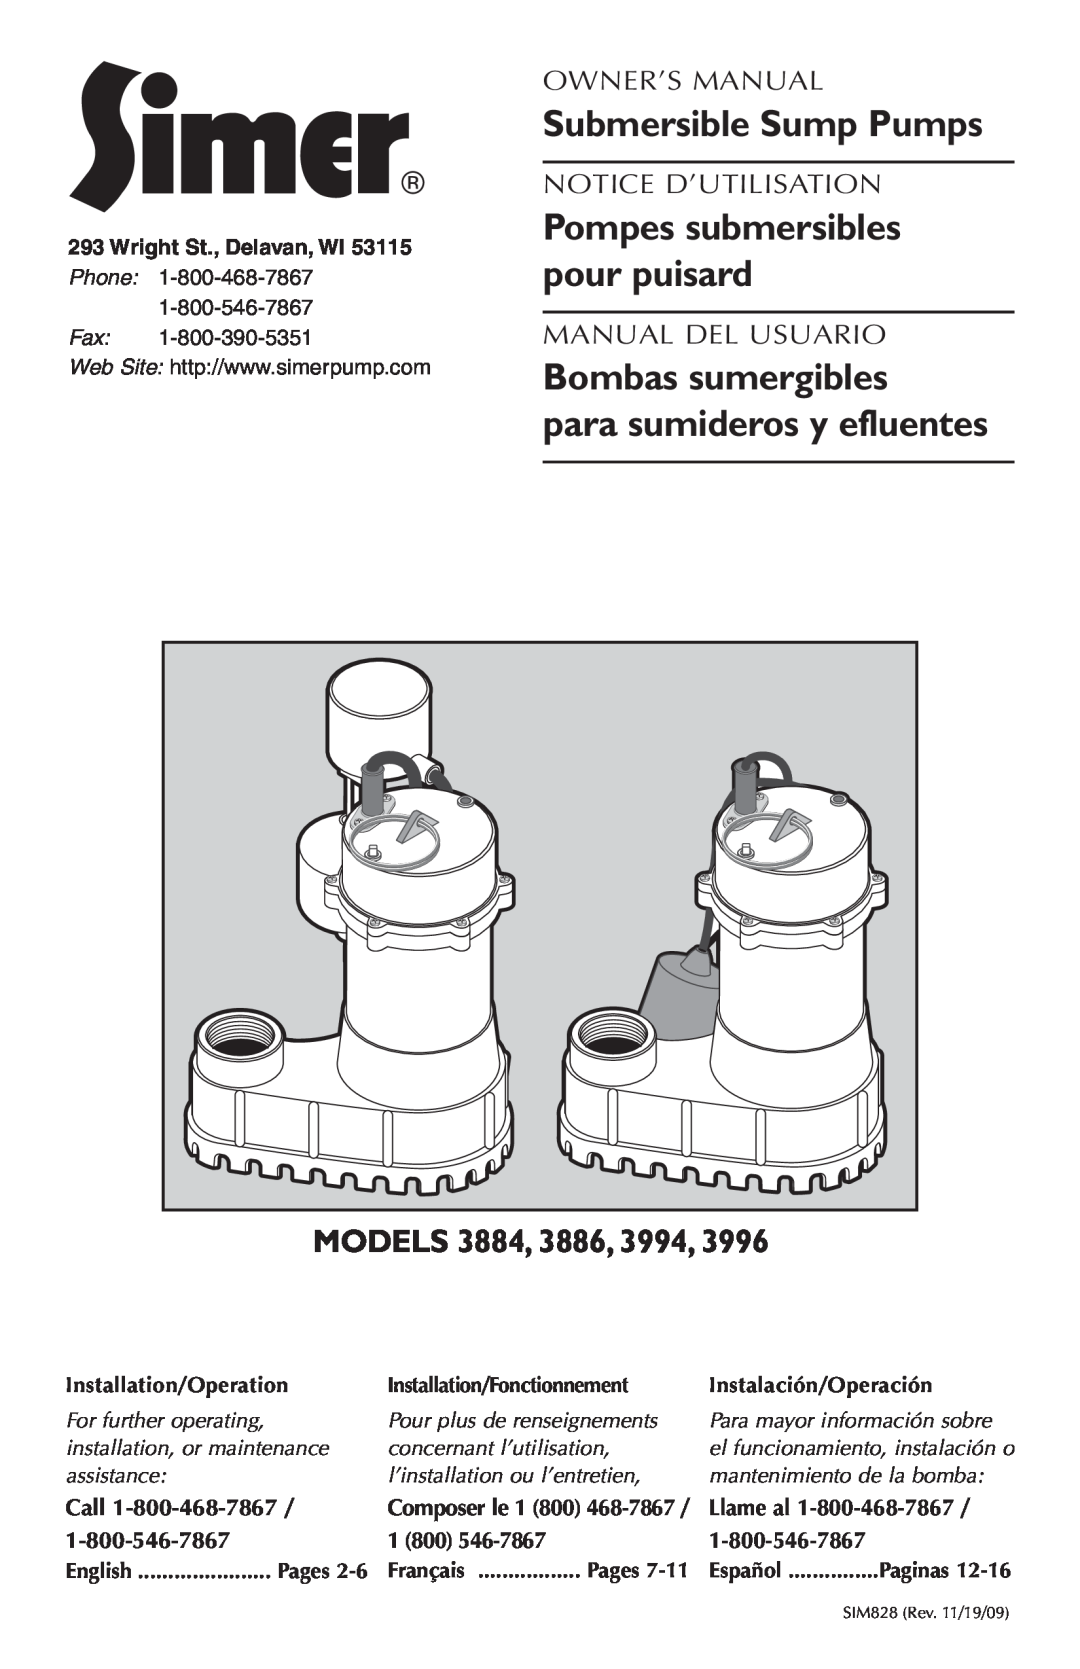 Simer Pumps 3996 owner manual Models, Wright St., Delavan, WI, Installation/Operation, Installation/Fonctionnement, Call 